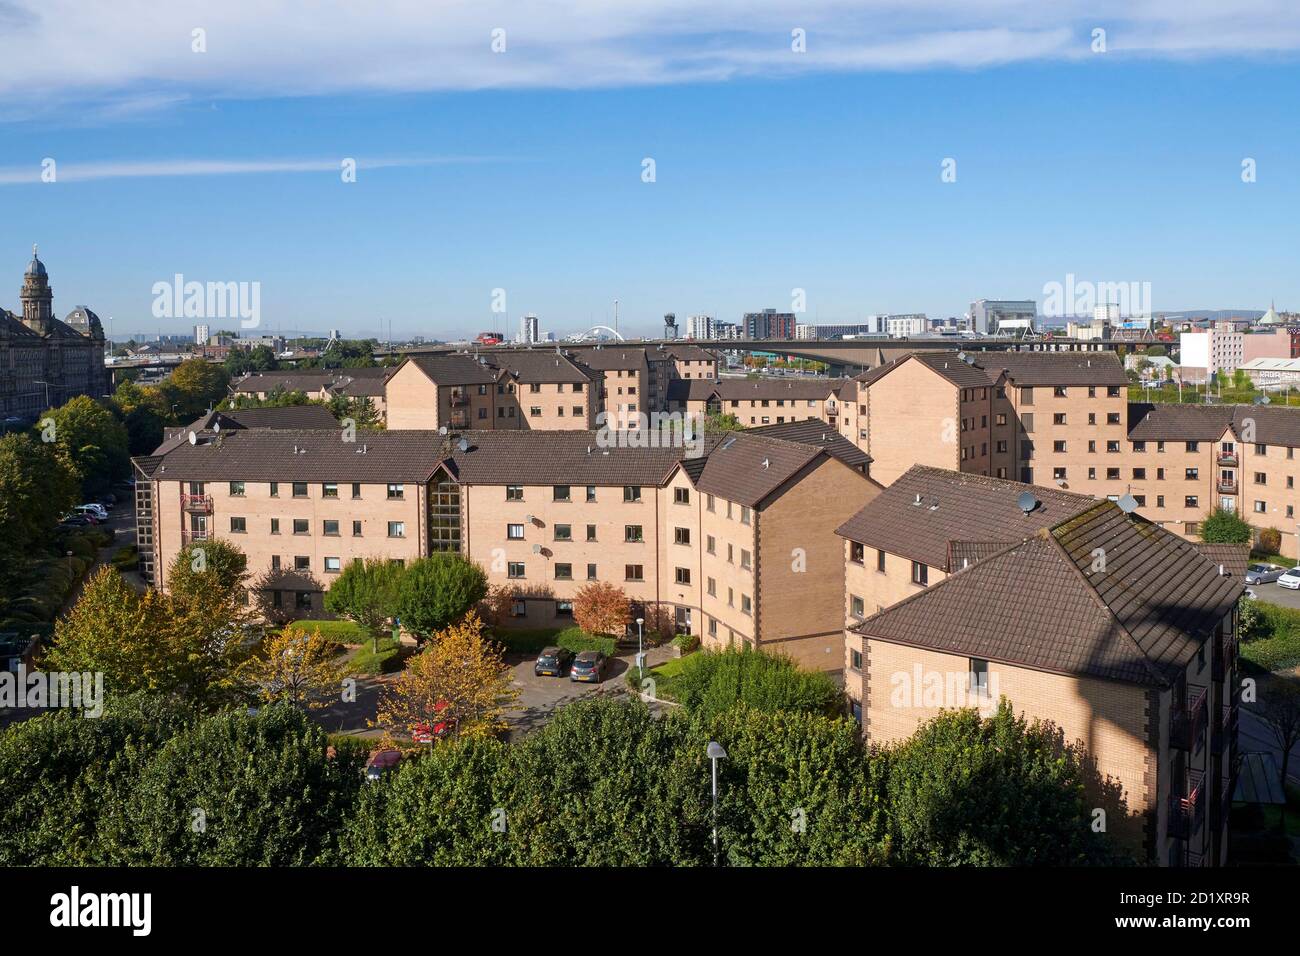 Looking over rooftops of Social housing towards the Clyde, at Tradestone, Glasgow, Central Scotland, UK Stock Photo